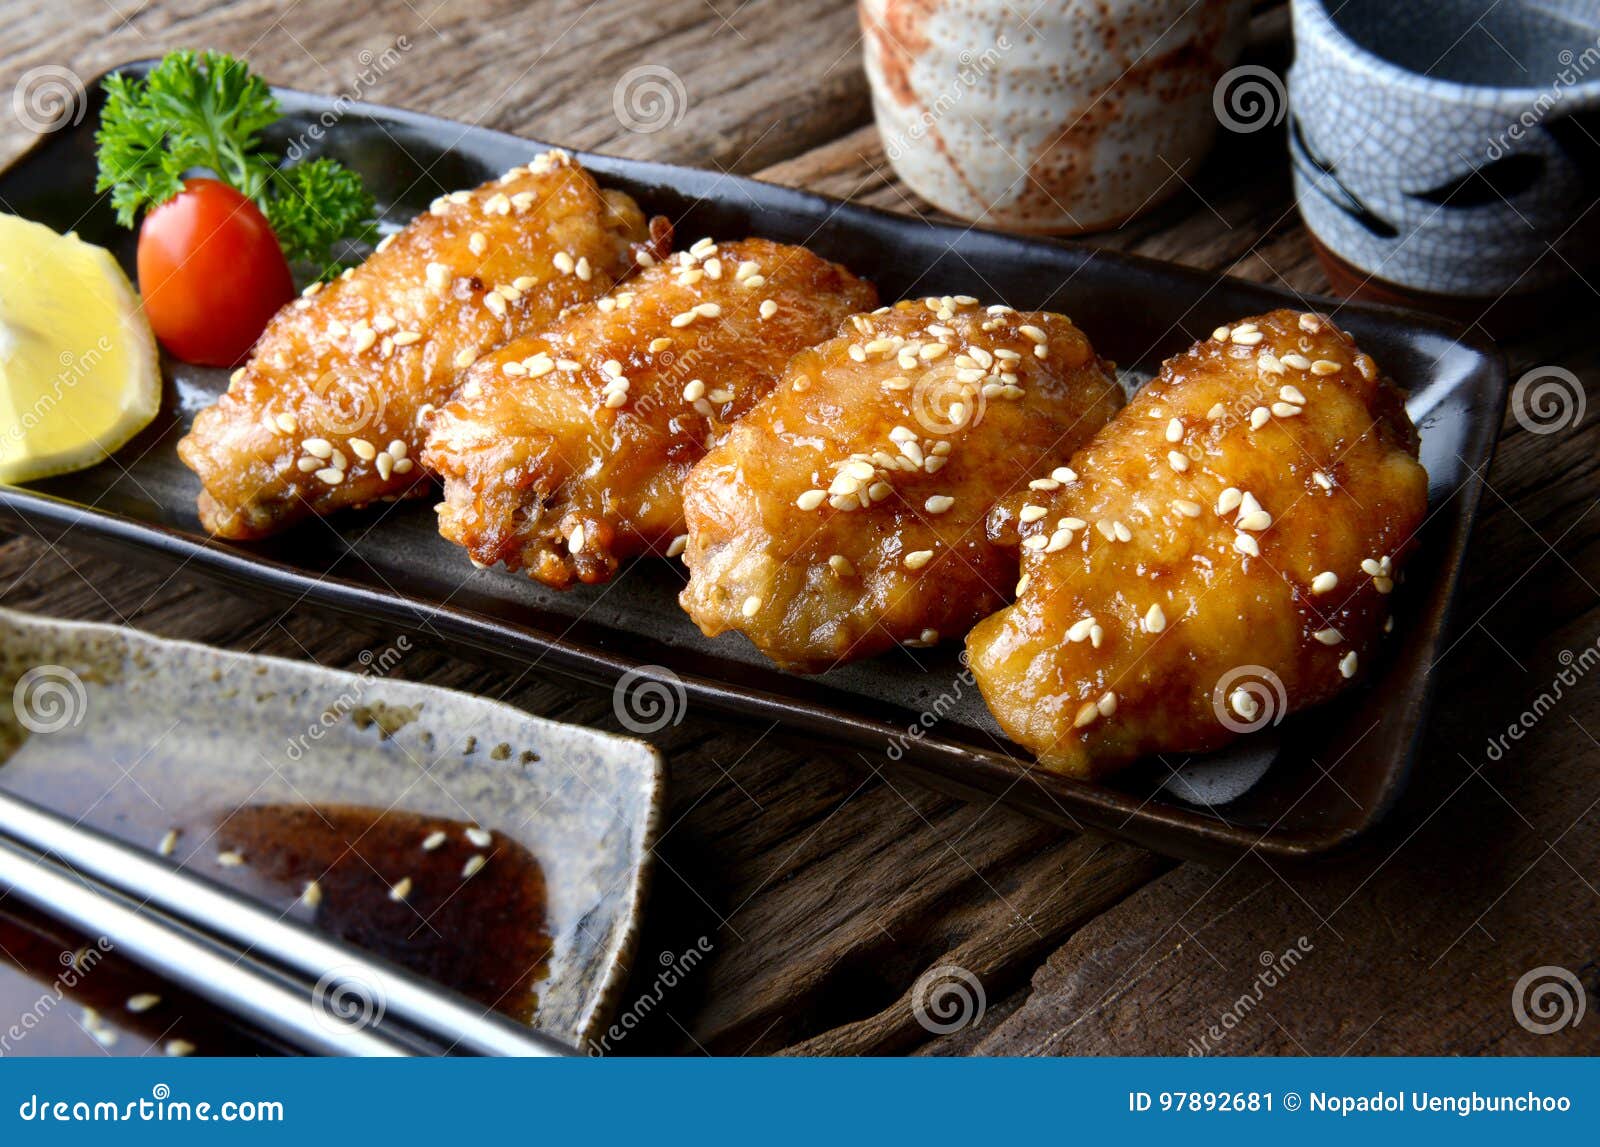 fried chicken wing with spicy sauce in japanese tebasaki style.